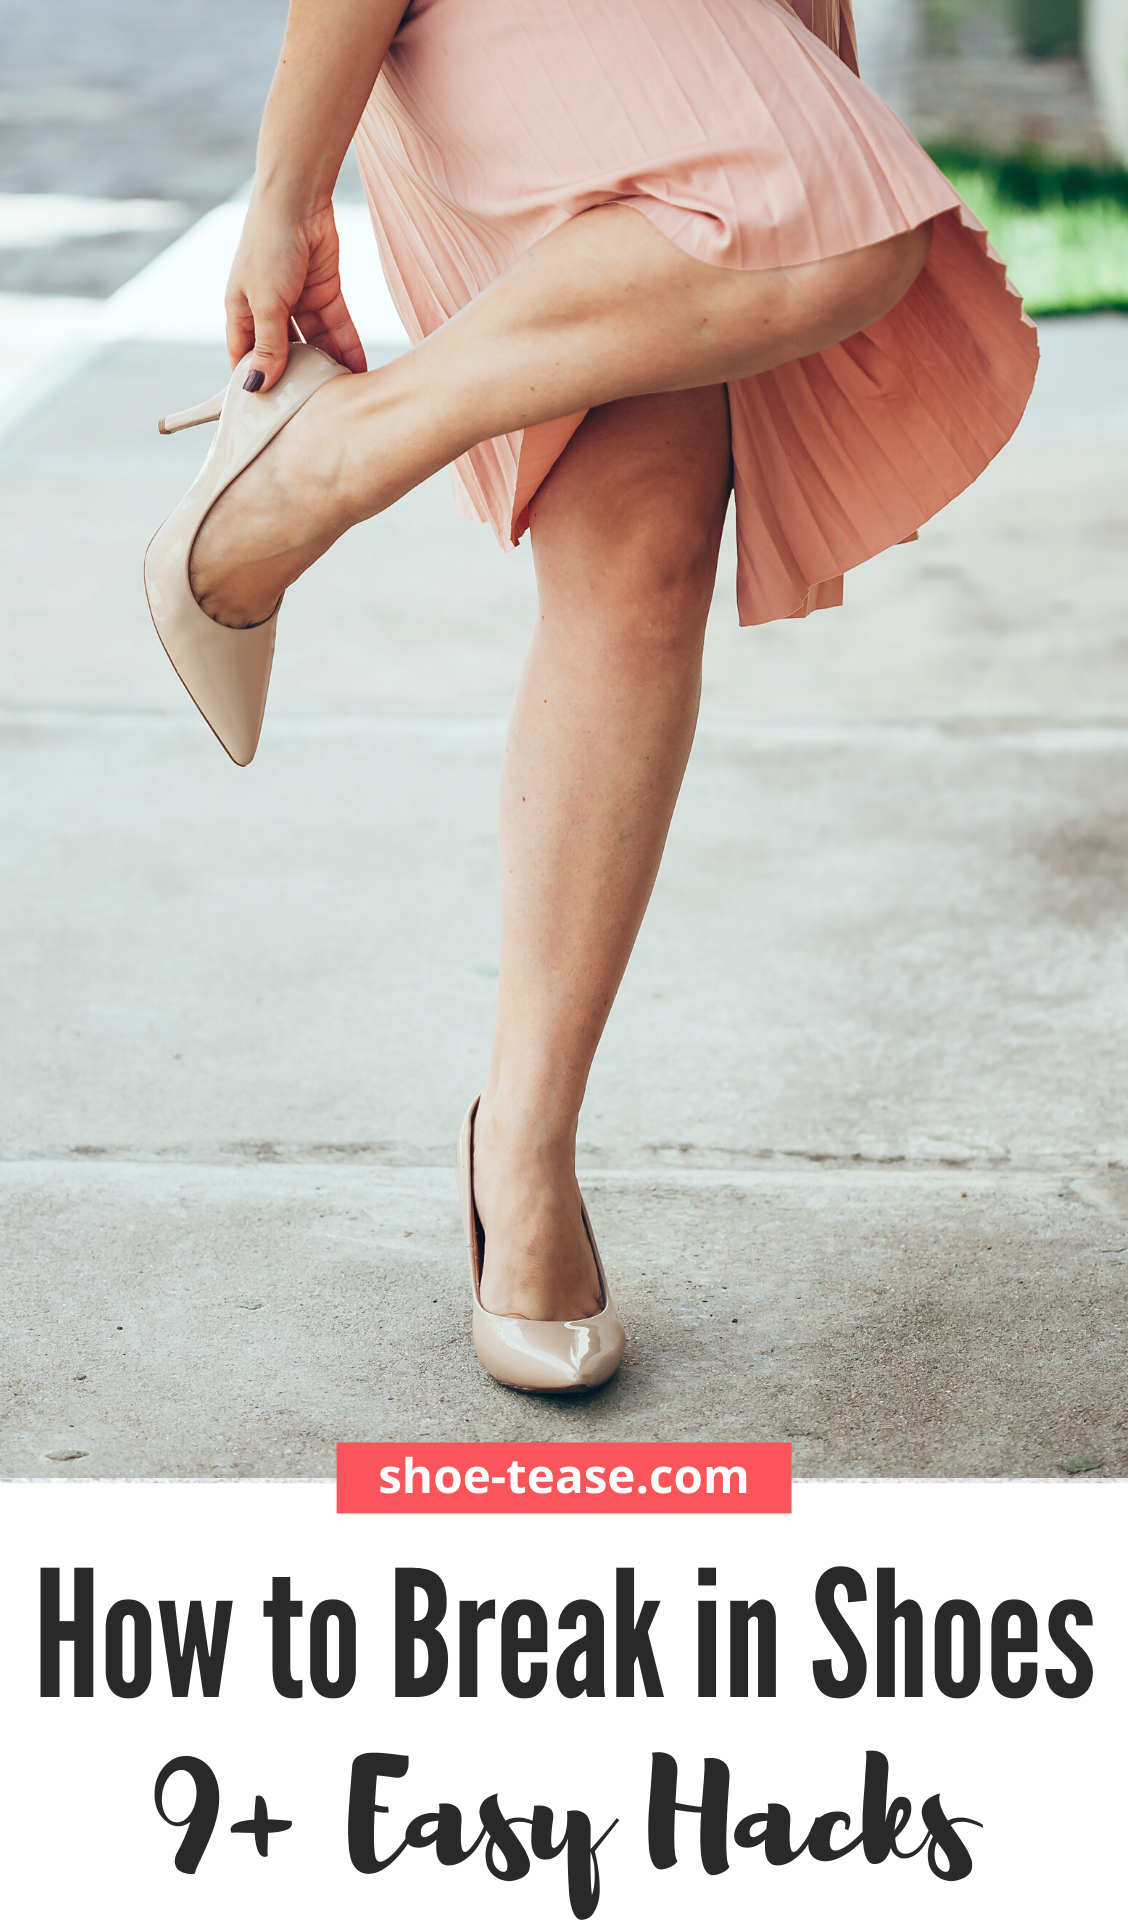 Text reading How to break in shoes 9 easy hacks over images of woman standing on sidewalk adjusting her heels.